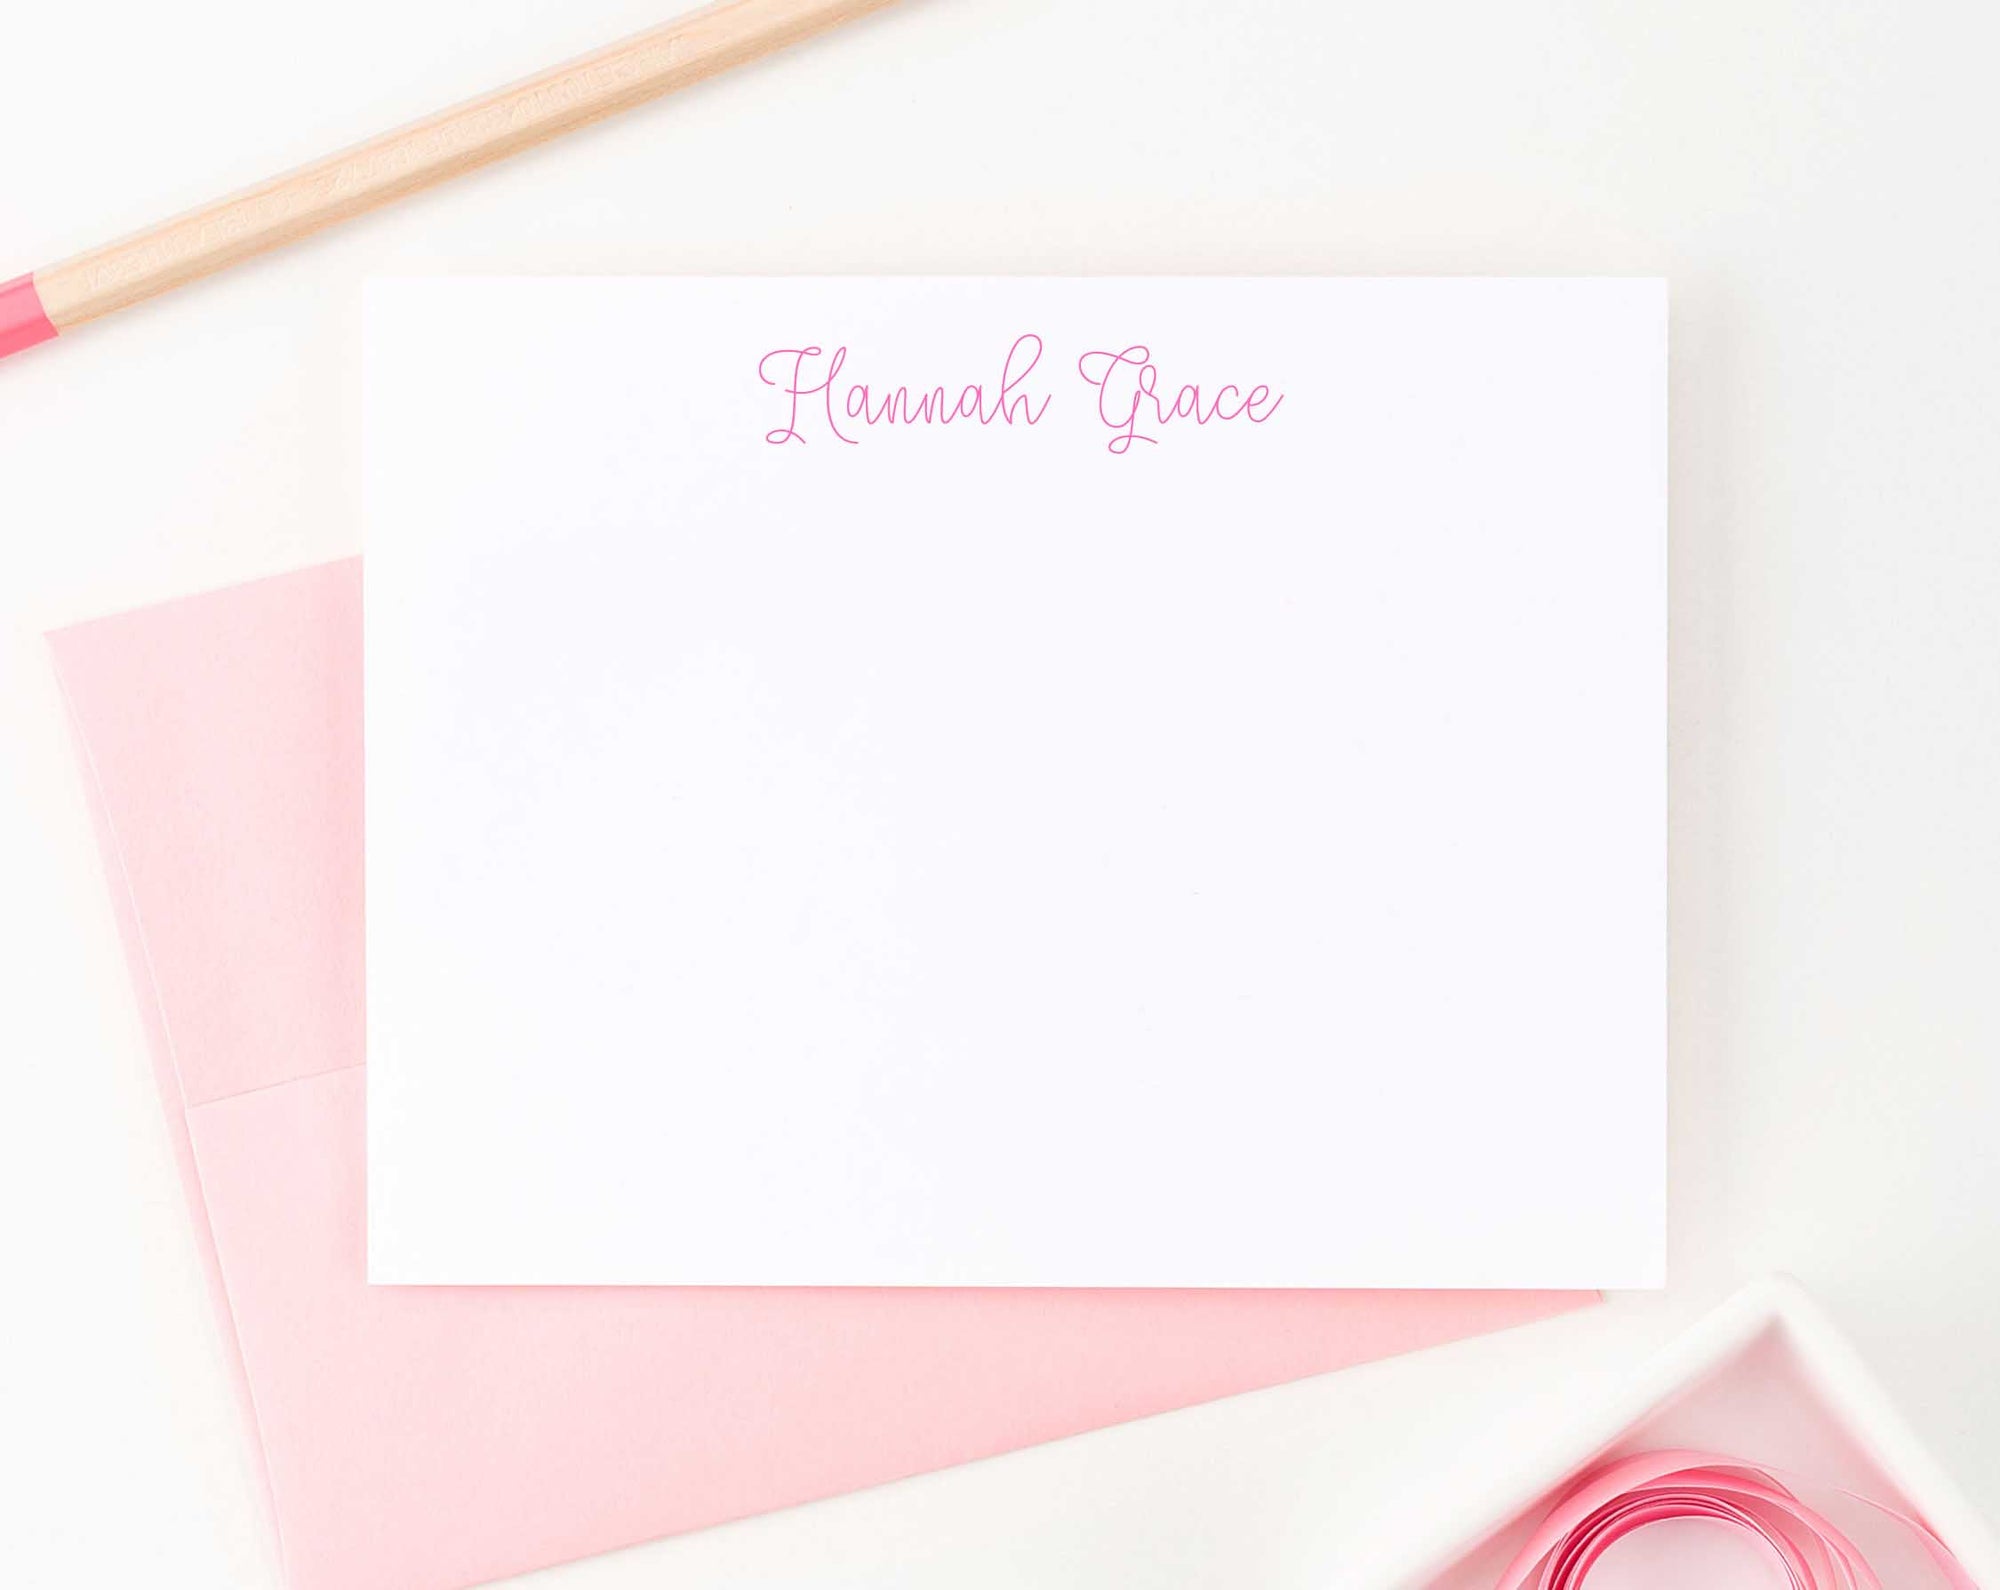 Personalized Notecards - Pink Girl with Blue Bow